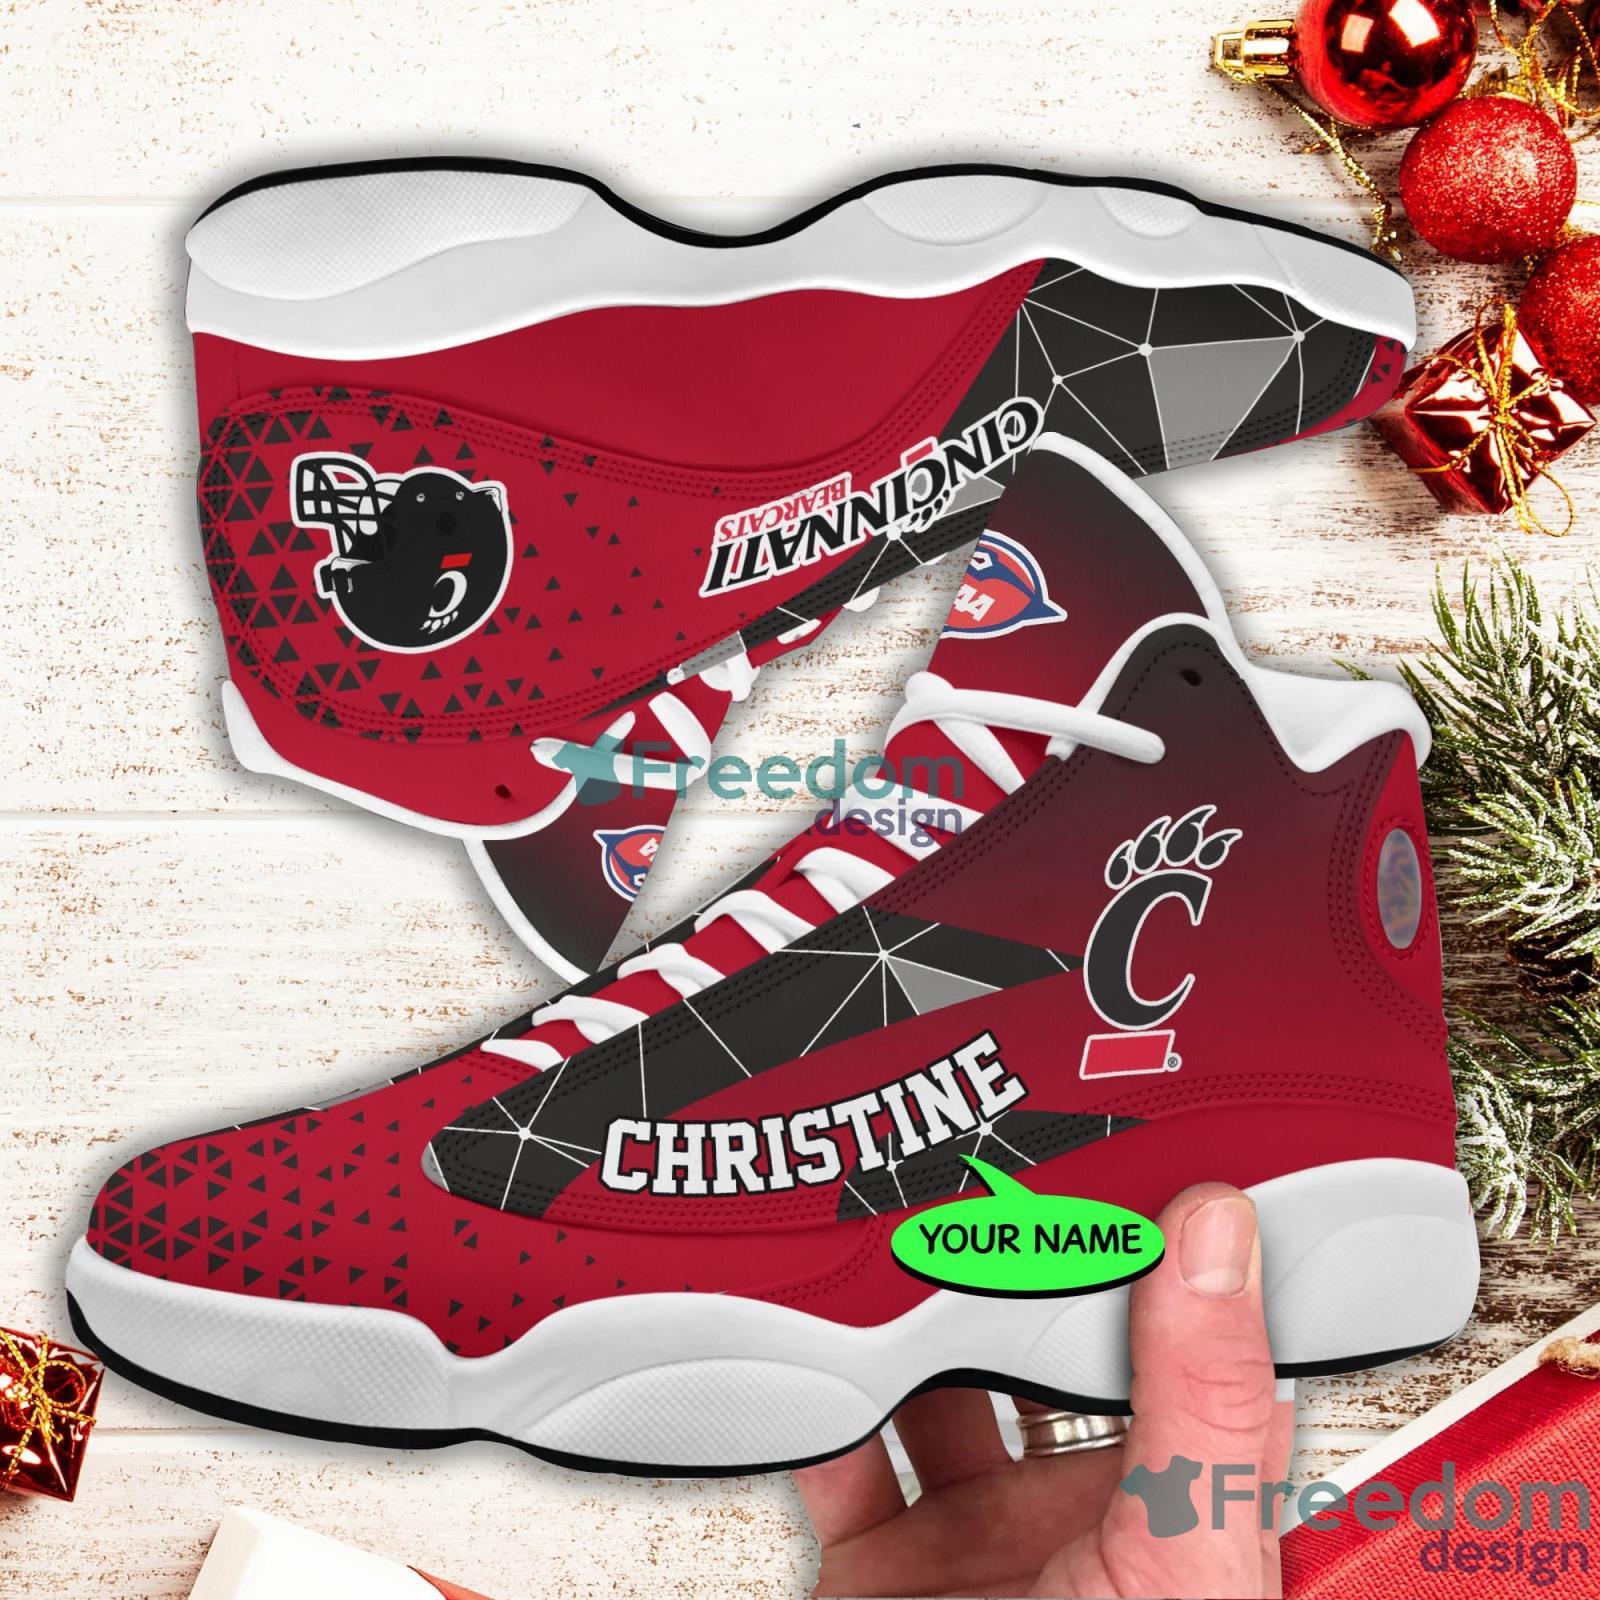  Customized Basketball Shoes with Mascot or Logo Abstract  Camouflage Design and Optional Custom Text AJ13 Style